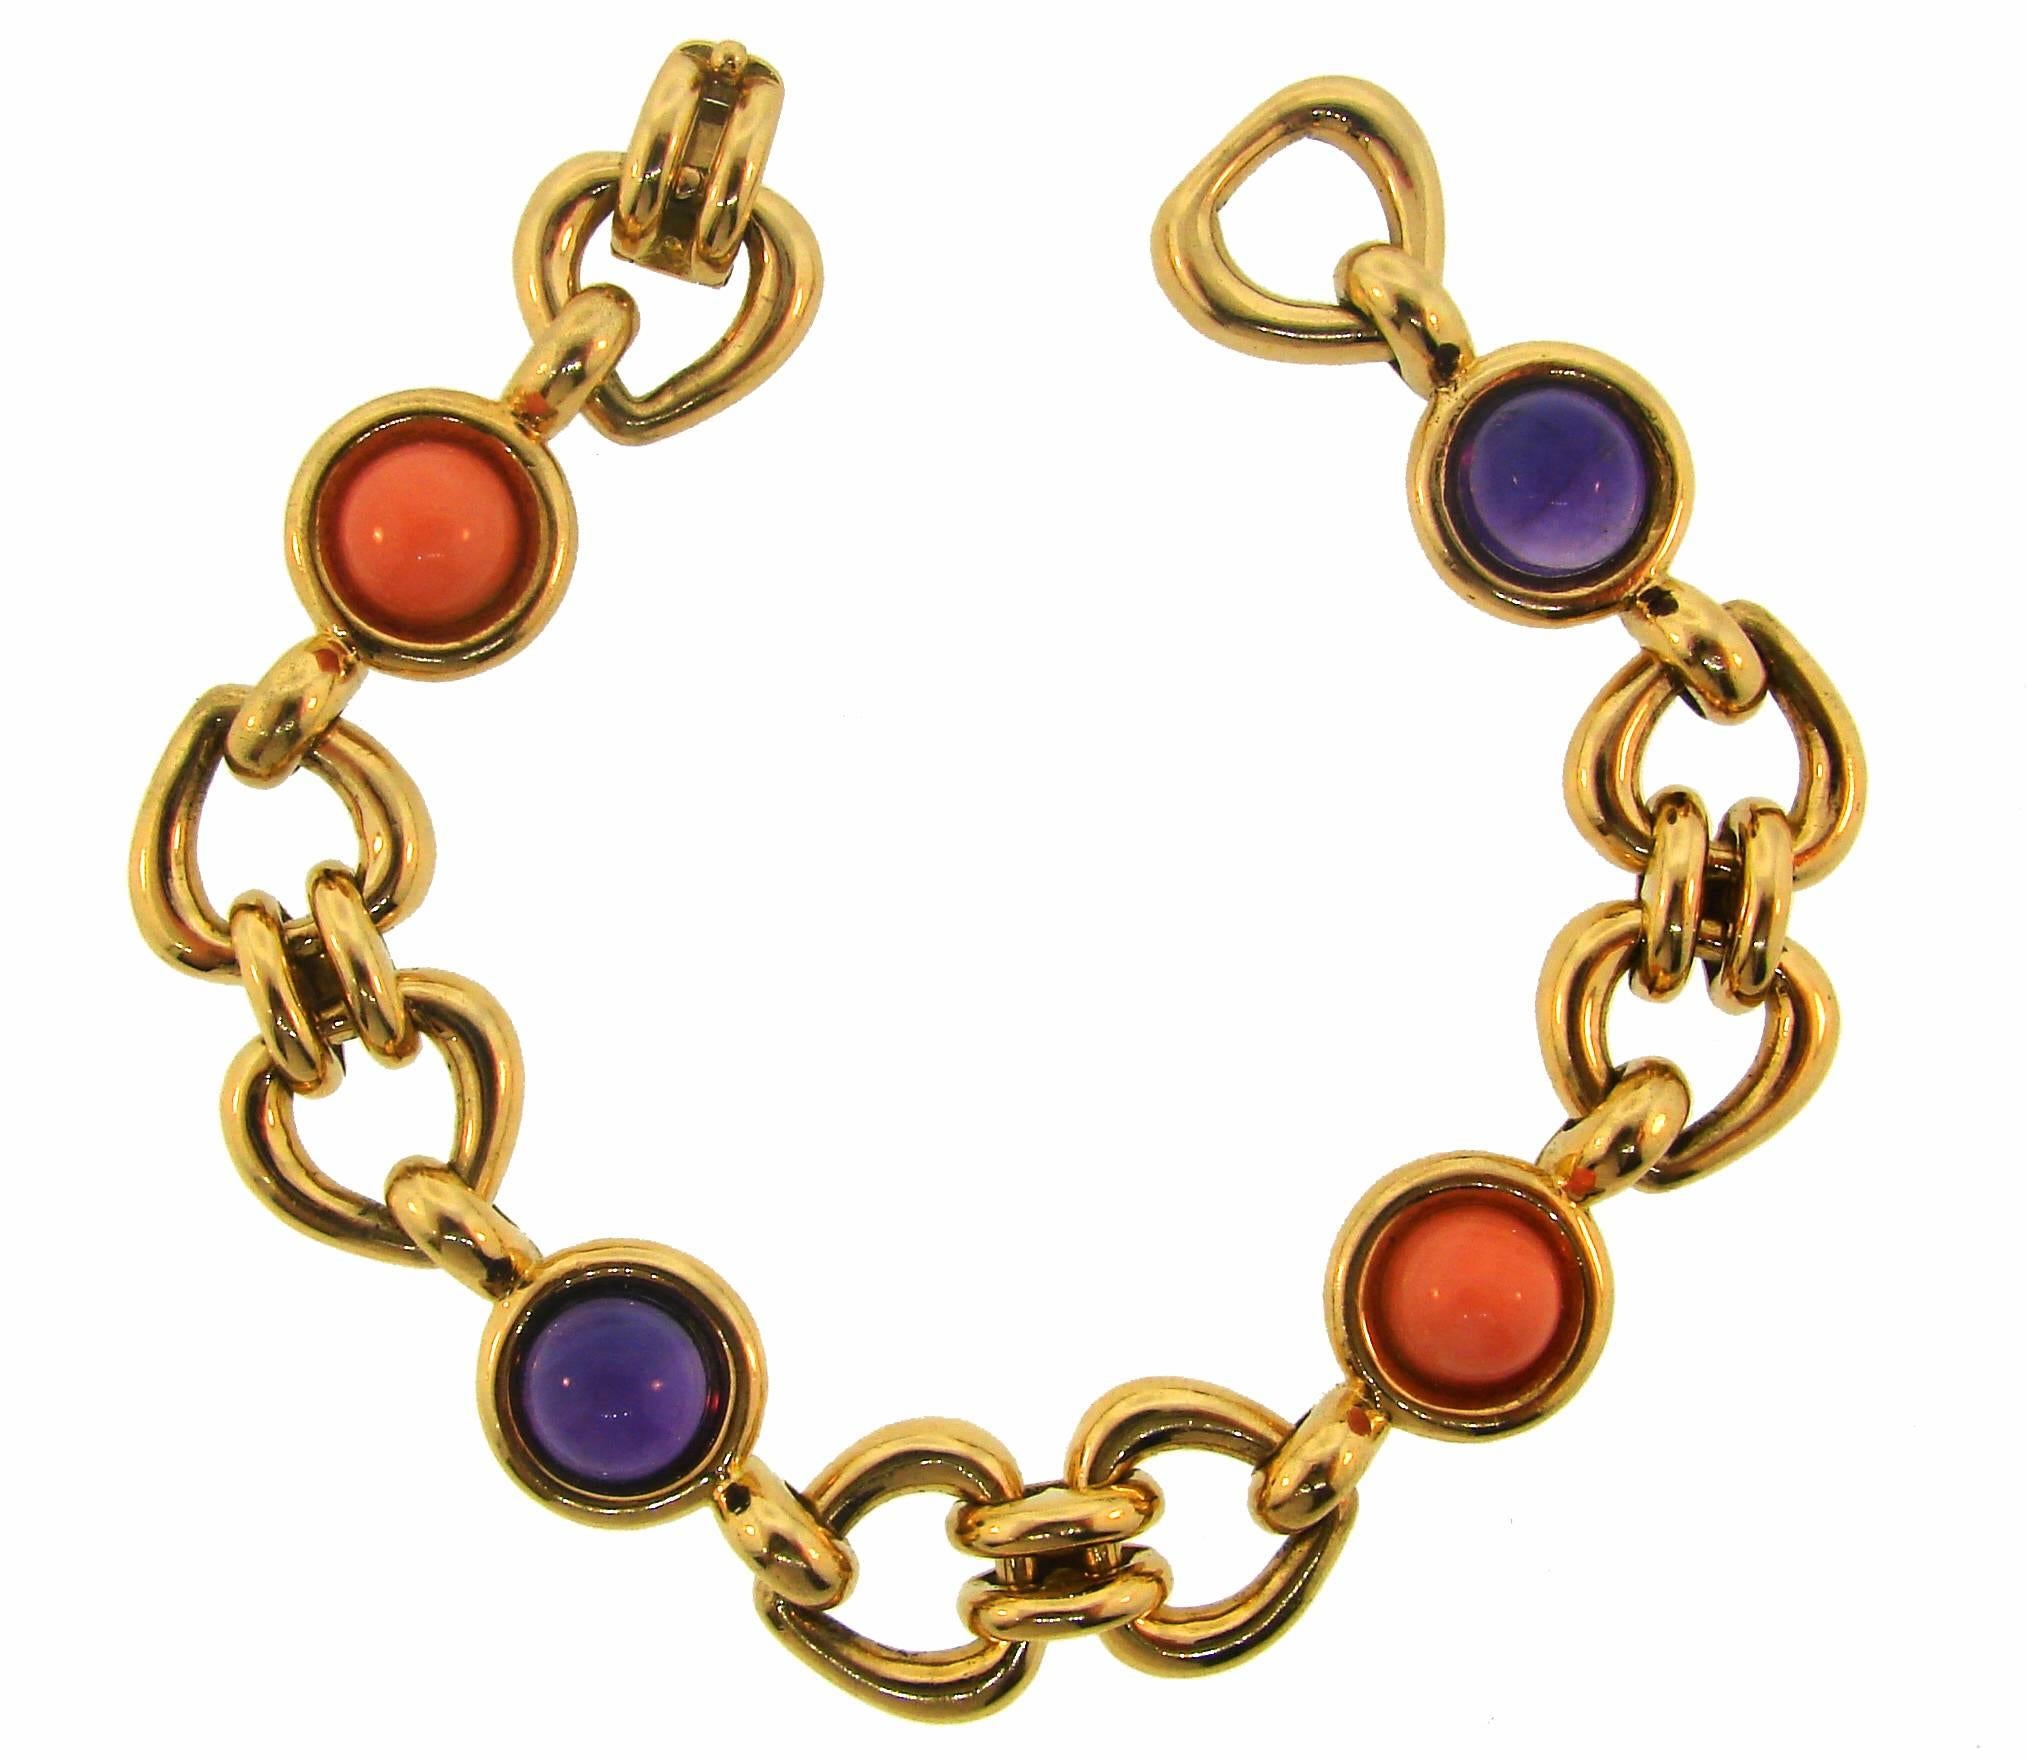 Colorful elegant bracelet created by Van Cleef & Arpels in France. Stylish and wearable, it is a great addition to your jewelry collection. 
It is made of 18 karat yellow gold and set with two cabochon corals and two cabochon amethysts. 
The